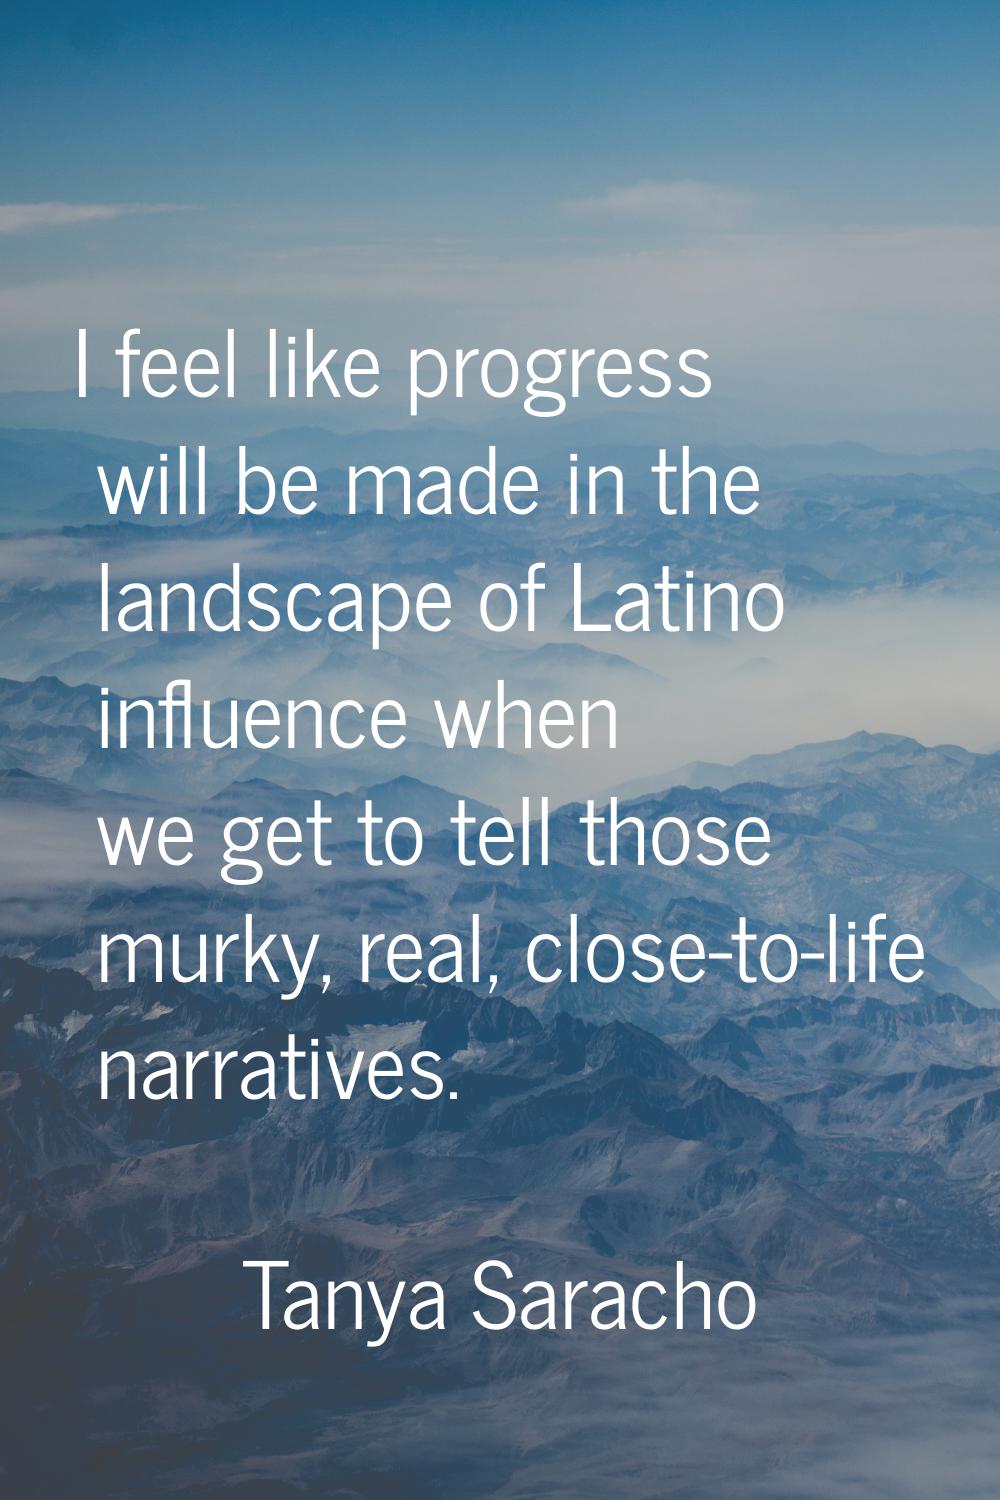 I feel like progress will be made in the landscape of Latino influence when we get to tell those mu